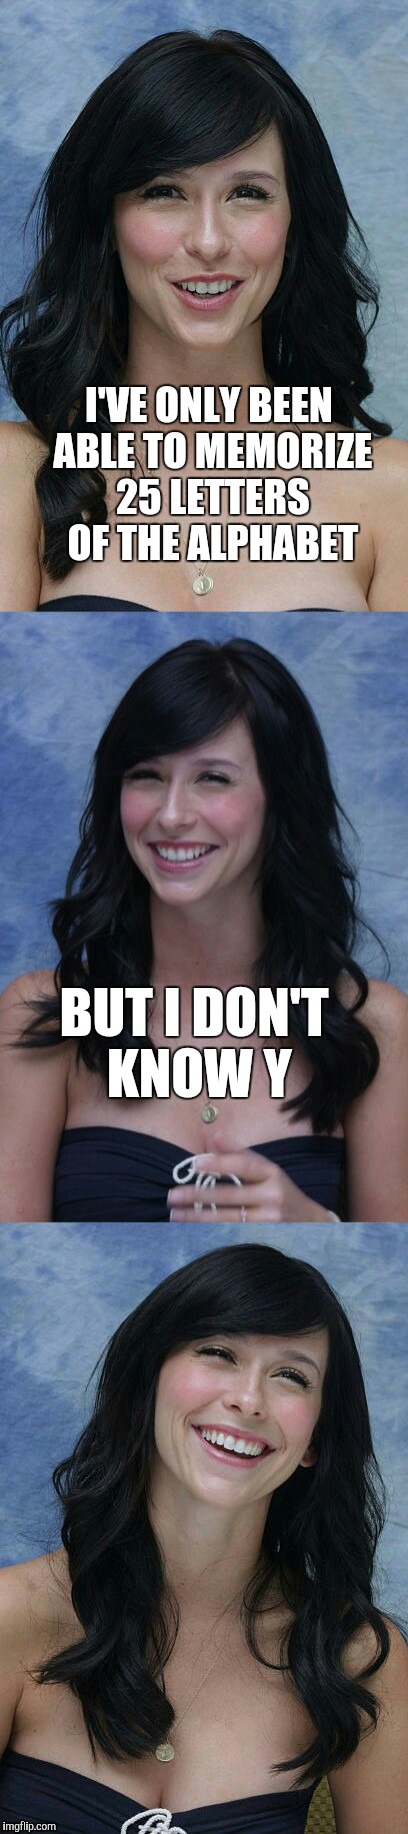 Introducing my new Jennifer Love Hewitt joke template! Template link is in the comments  | I'VE ONLY BEEN ABLE TO MEMORIZE 25 LETTERS OF THE ALPHABET; BUT I DON'T KNOW Y | image tagged in jennifer love hewitt bad puns template,jennifer love hewitt,jbmemegeek,bad puns | made w/ Imgflip meme maker